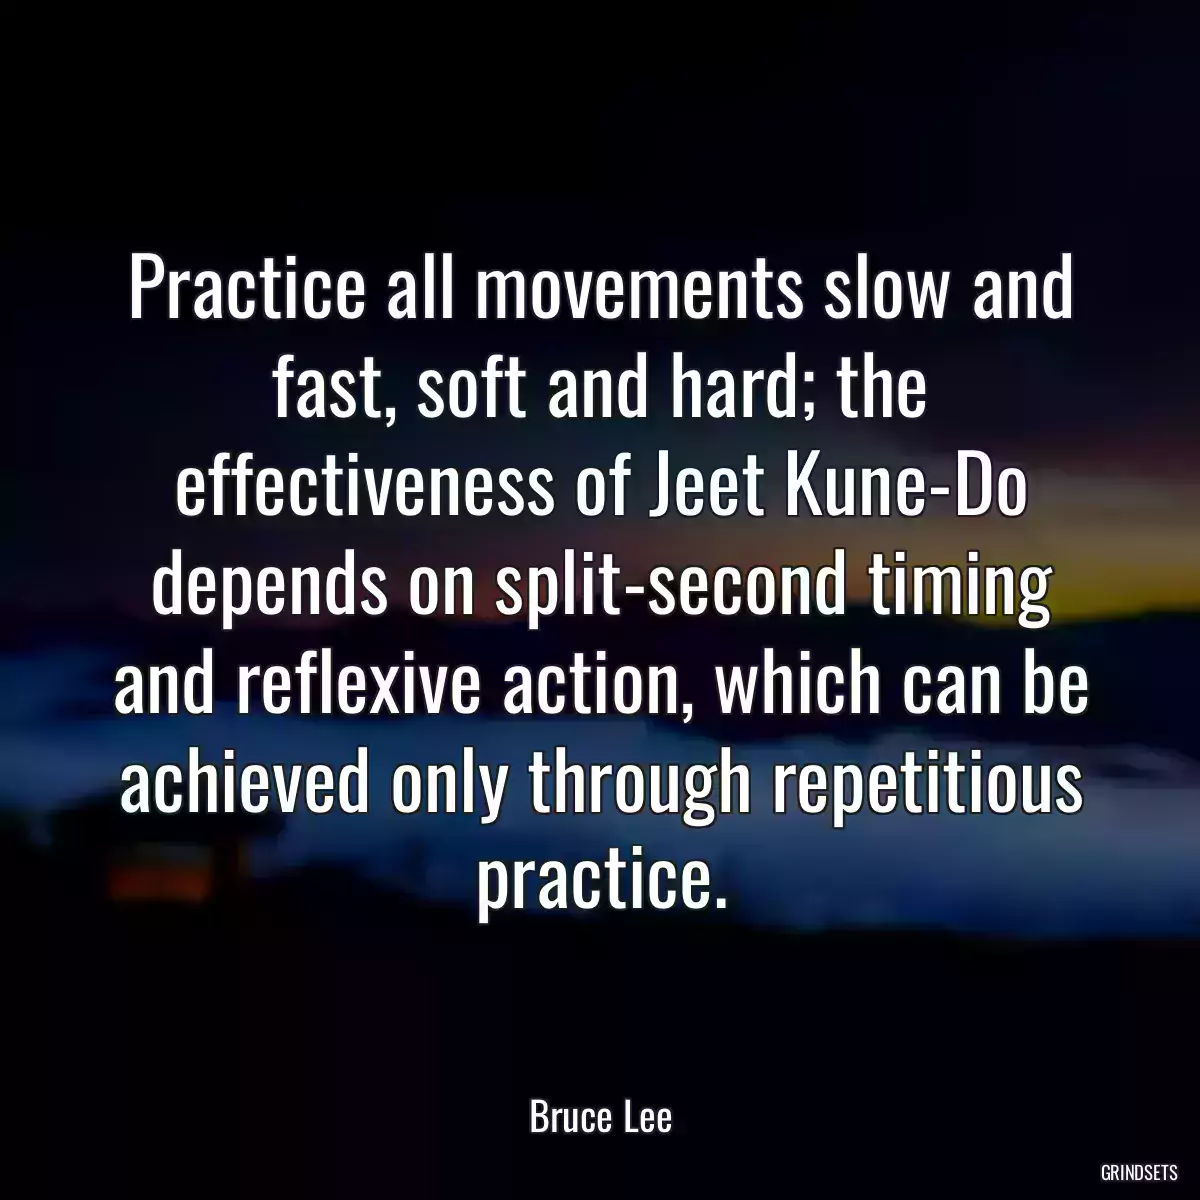 Practice all movements slow and fast, soft and hard; the effectiveness of Jeet Kune-Do depends on split-second timing and reflexive action, which can be achieved only through repetitious practice.